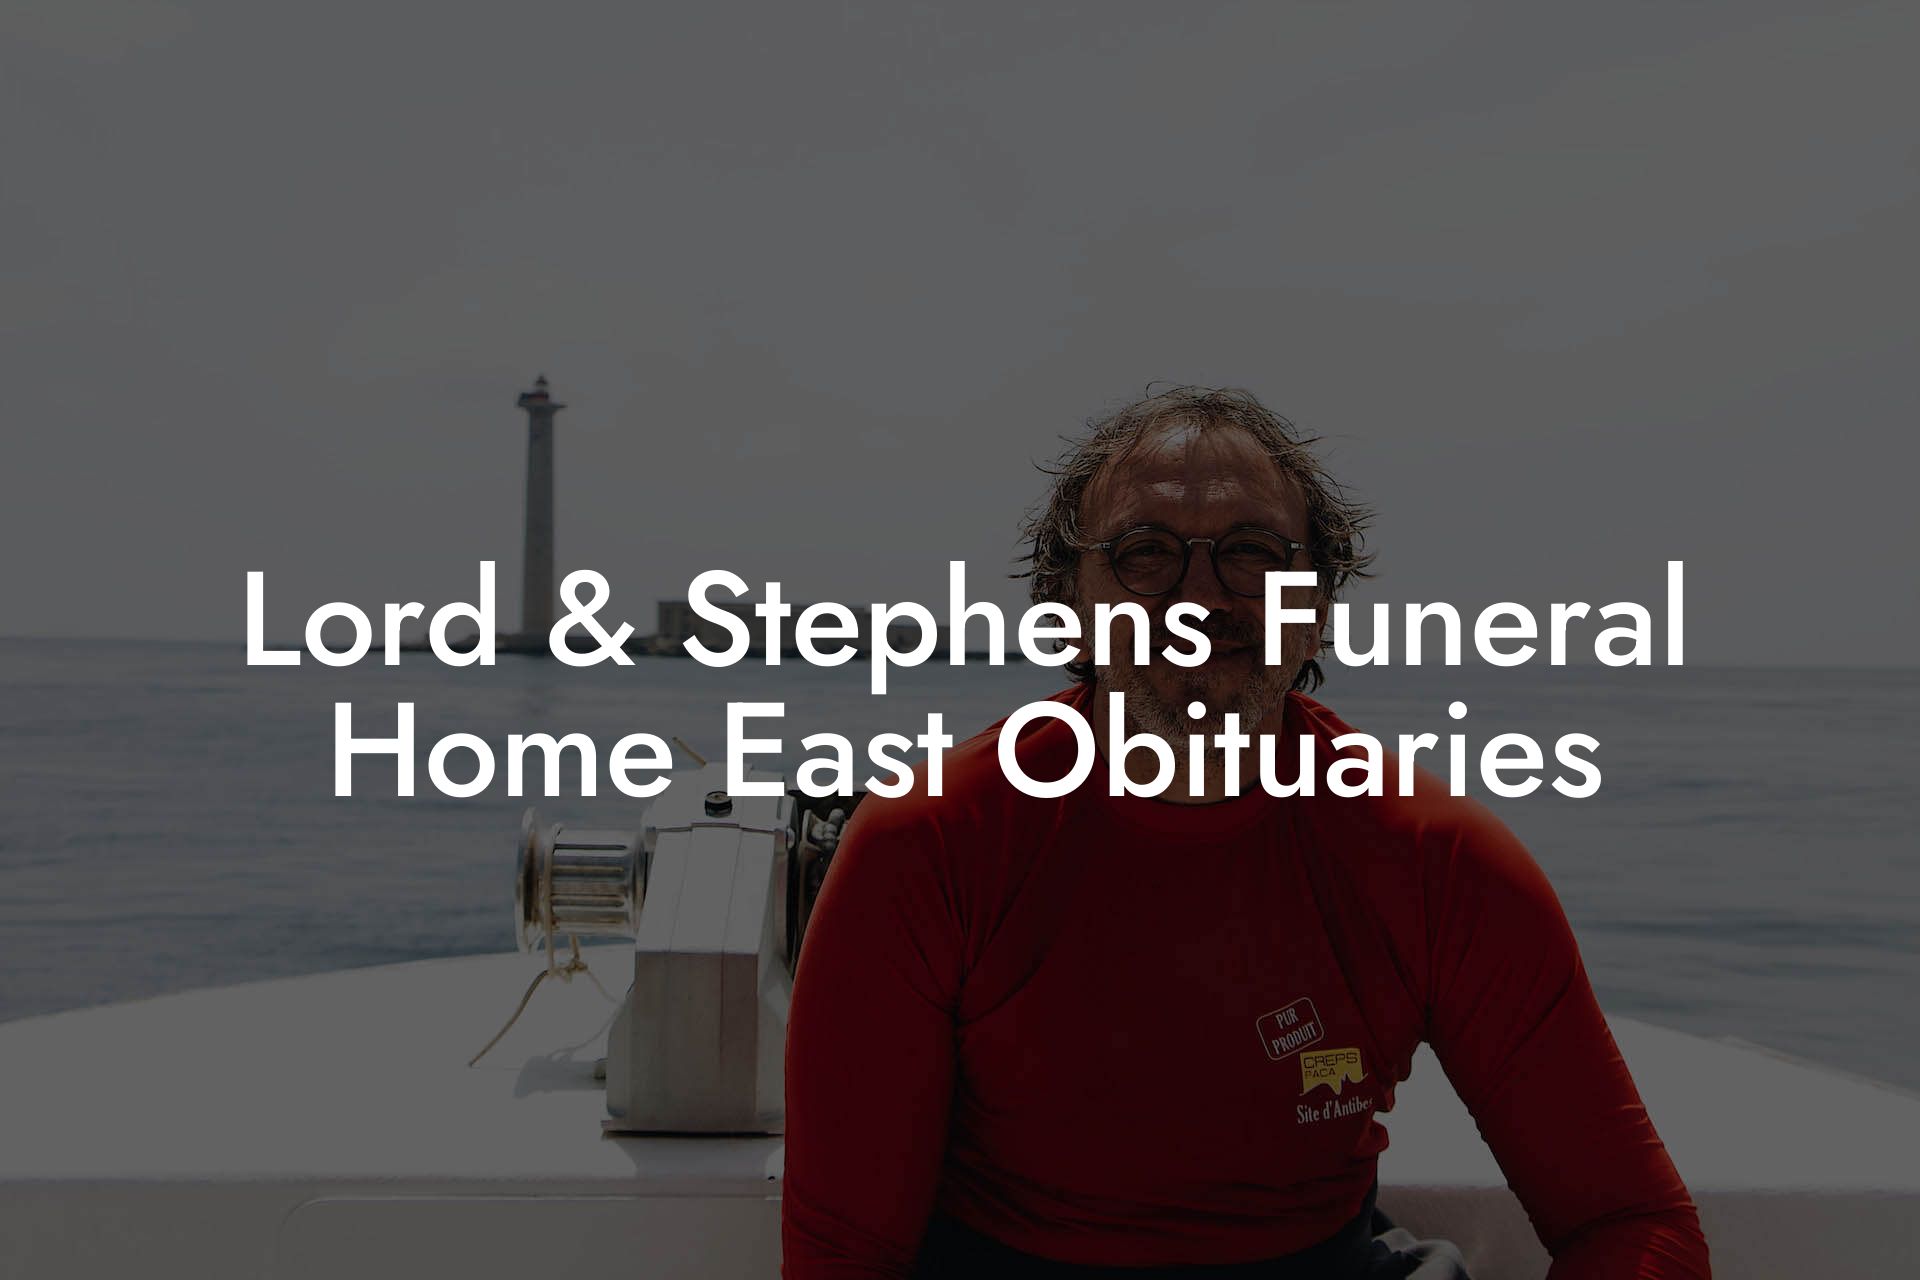 Lord & Stephens Funeral Home East Obituaries - Eulogy Assistant